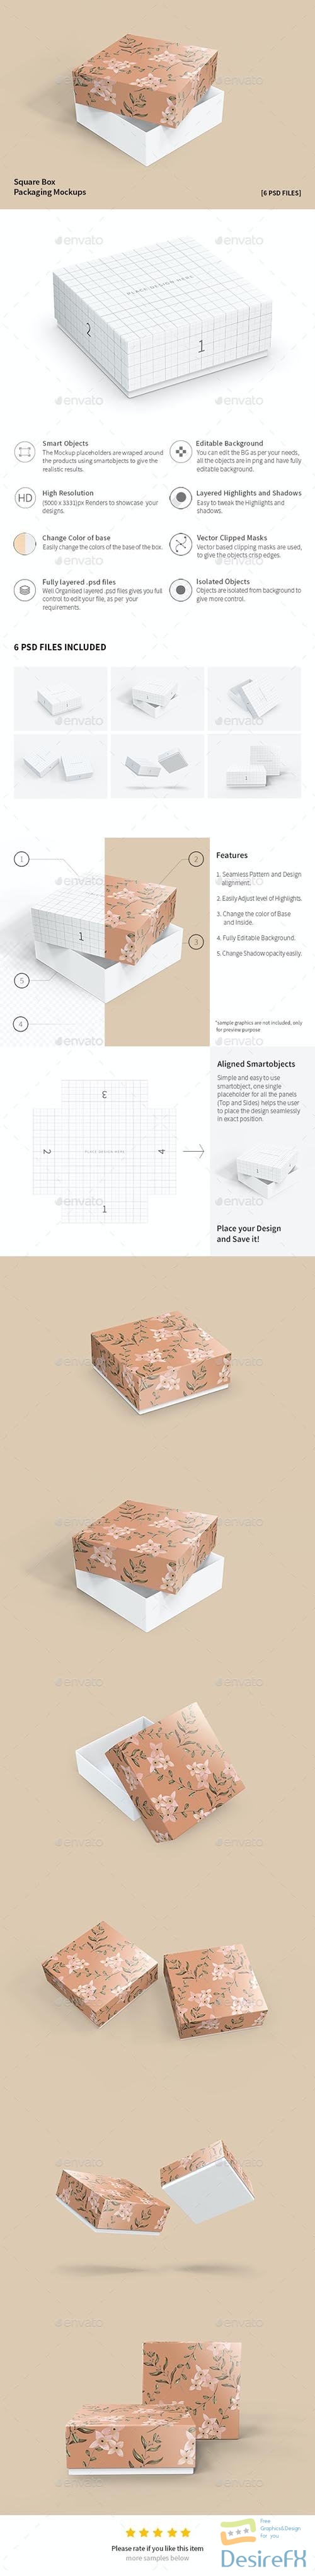 GraphicRiver - Square Box Packaging Mockups 32358611